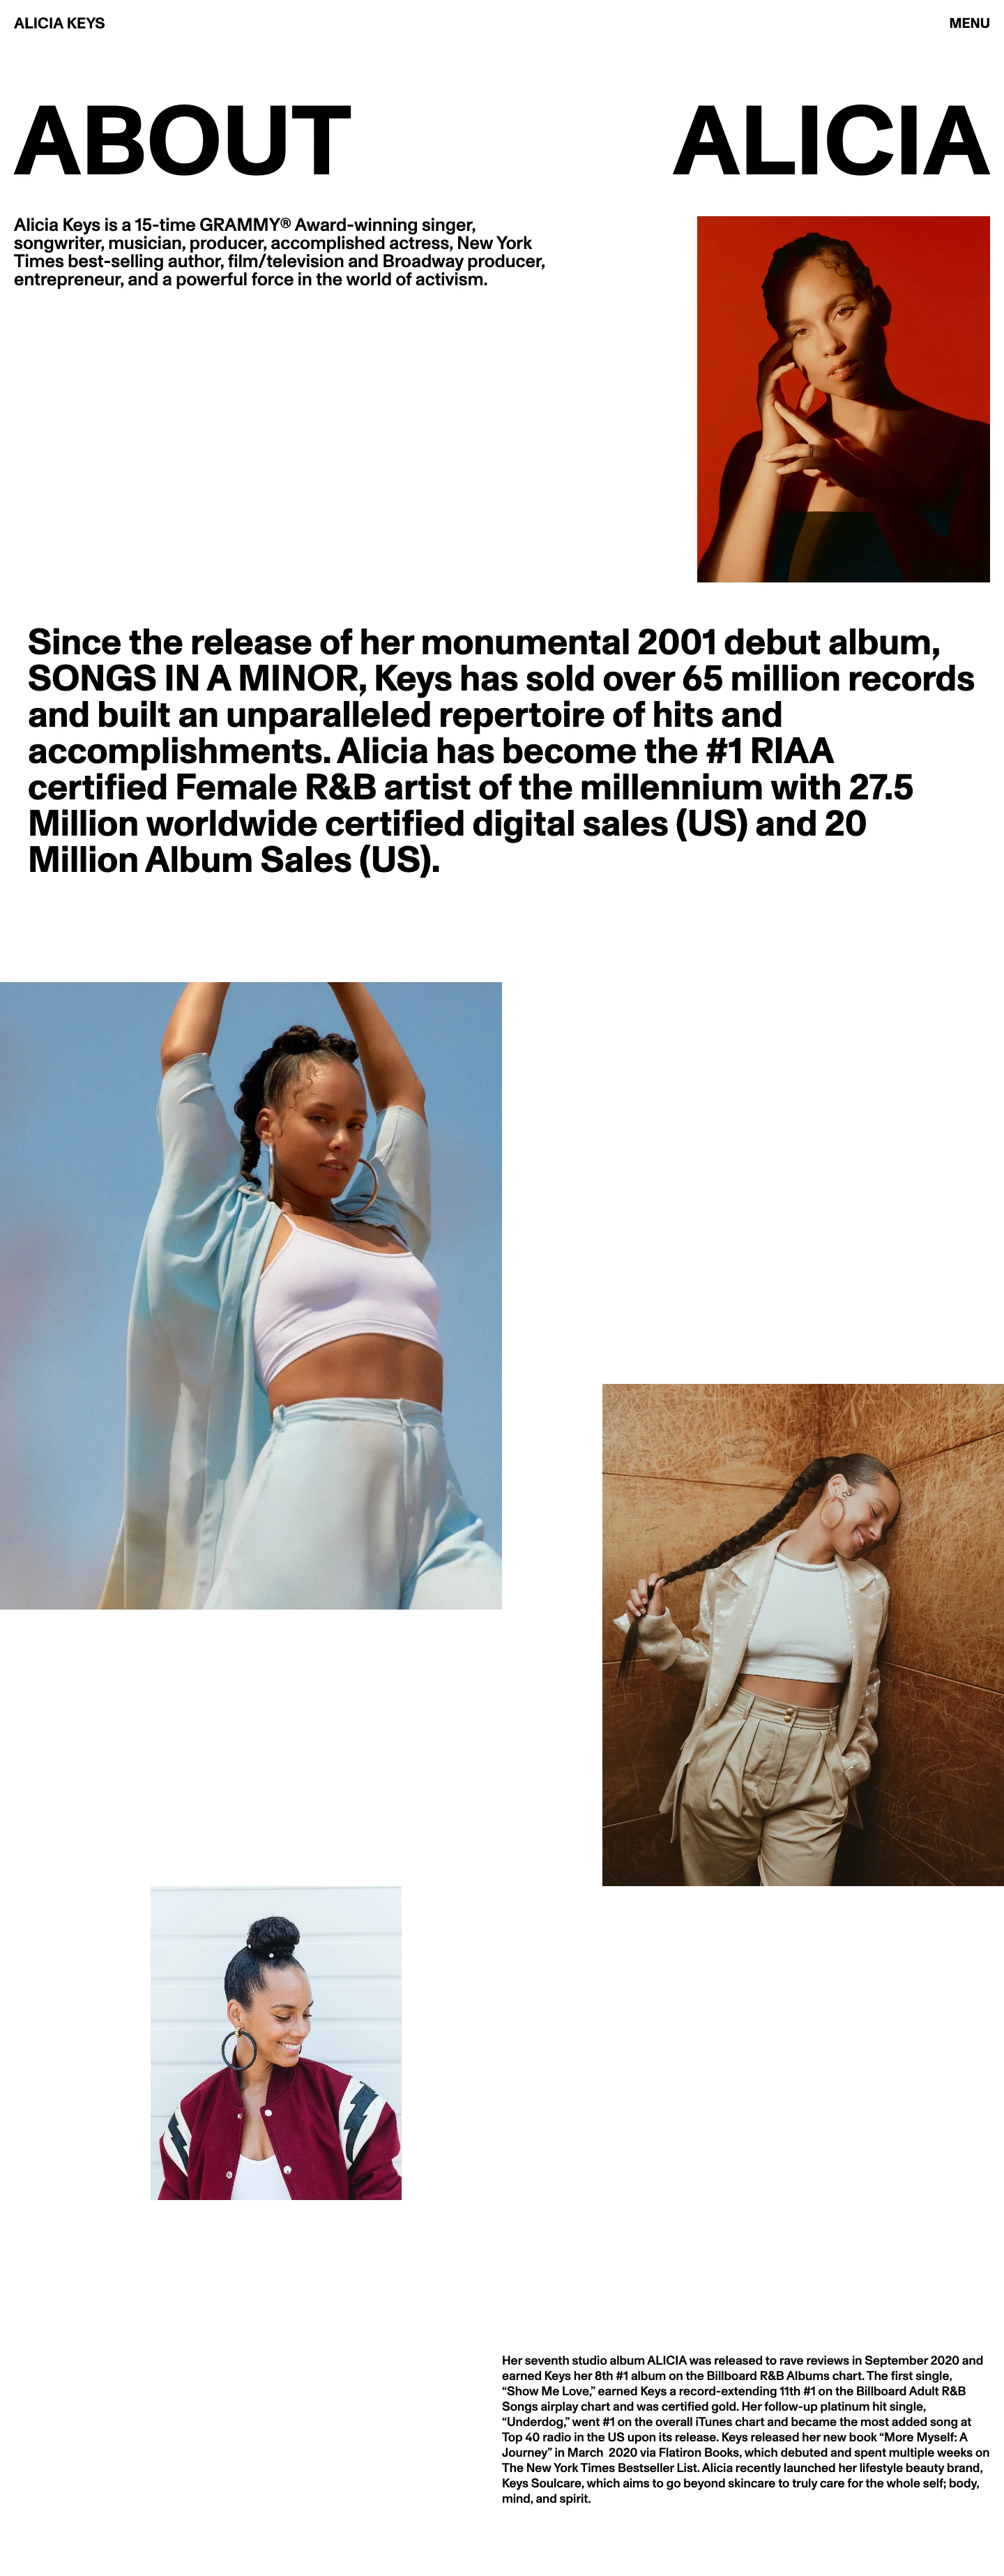 Alicia Keys Landing Page Example: Alicia Keys is a 15-time GRAMMY® Award-winning singer, songwriter, musician, producer, accomplished actress, New York Times best-selling author, film/television and Broadway producer, entrepreneur, and a powerful force in the world of activism.